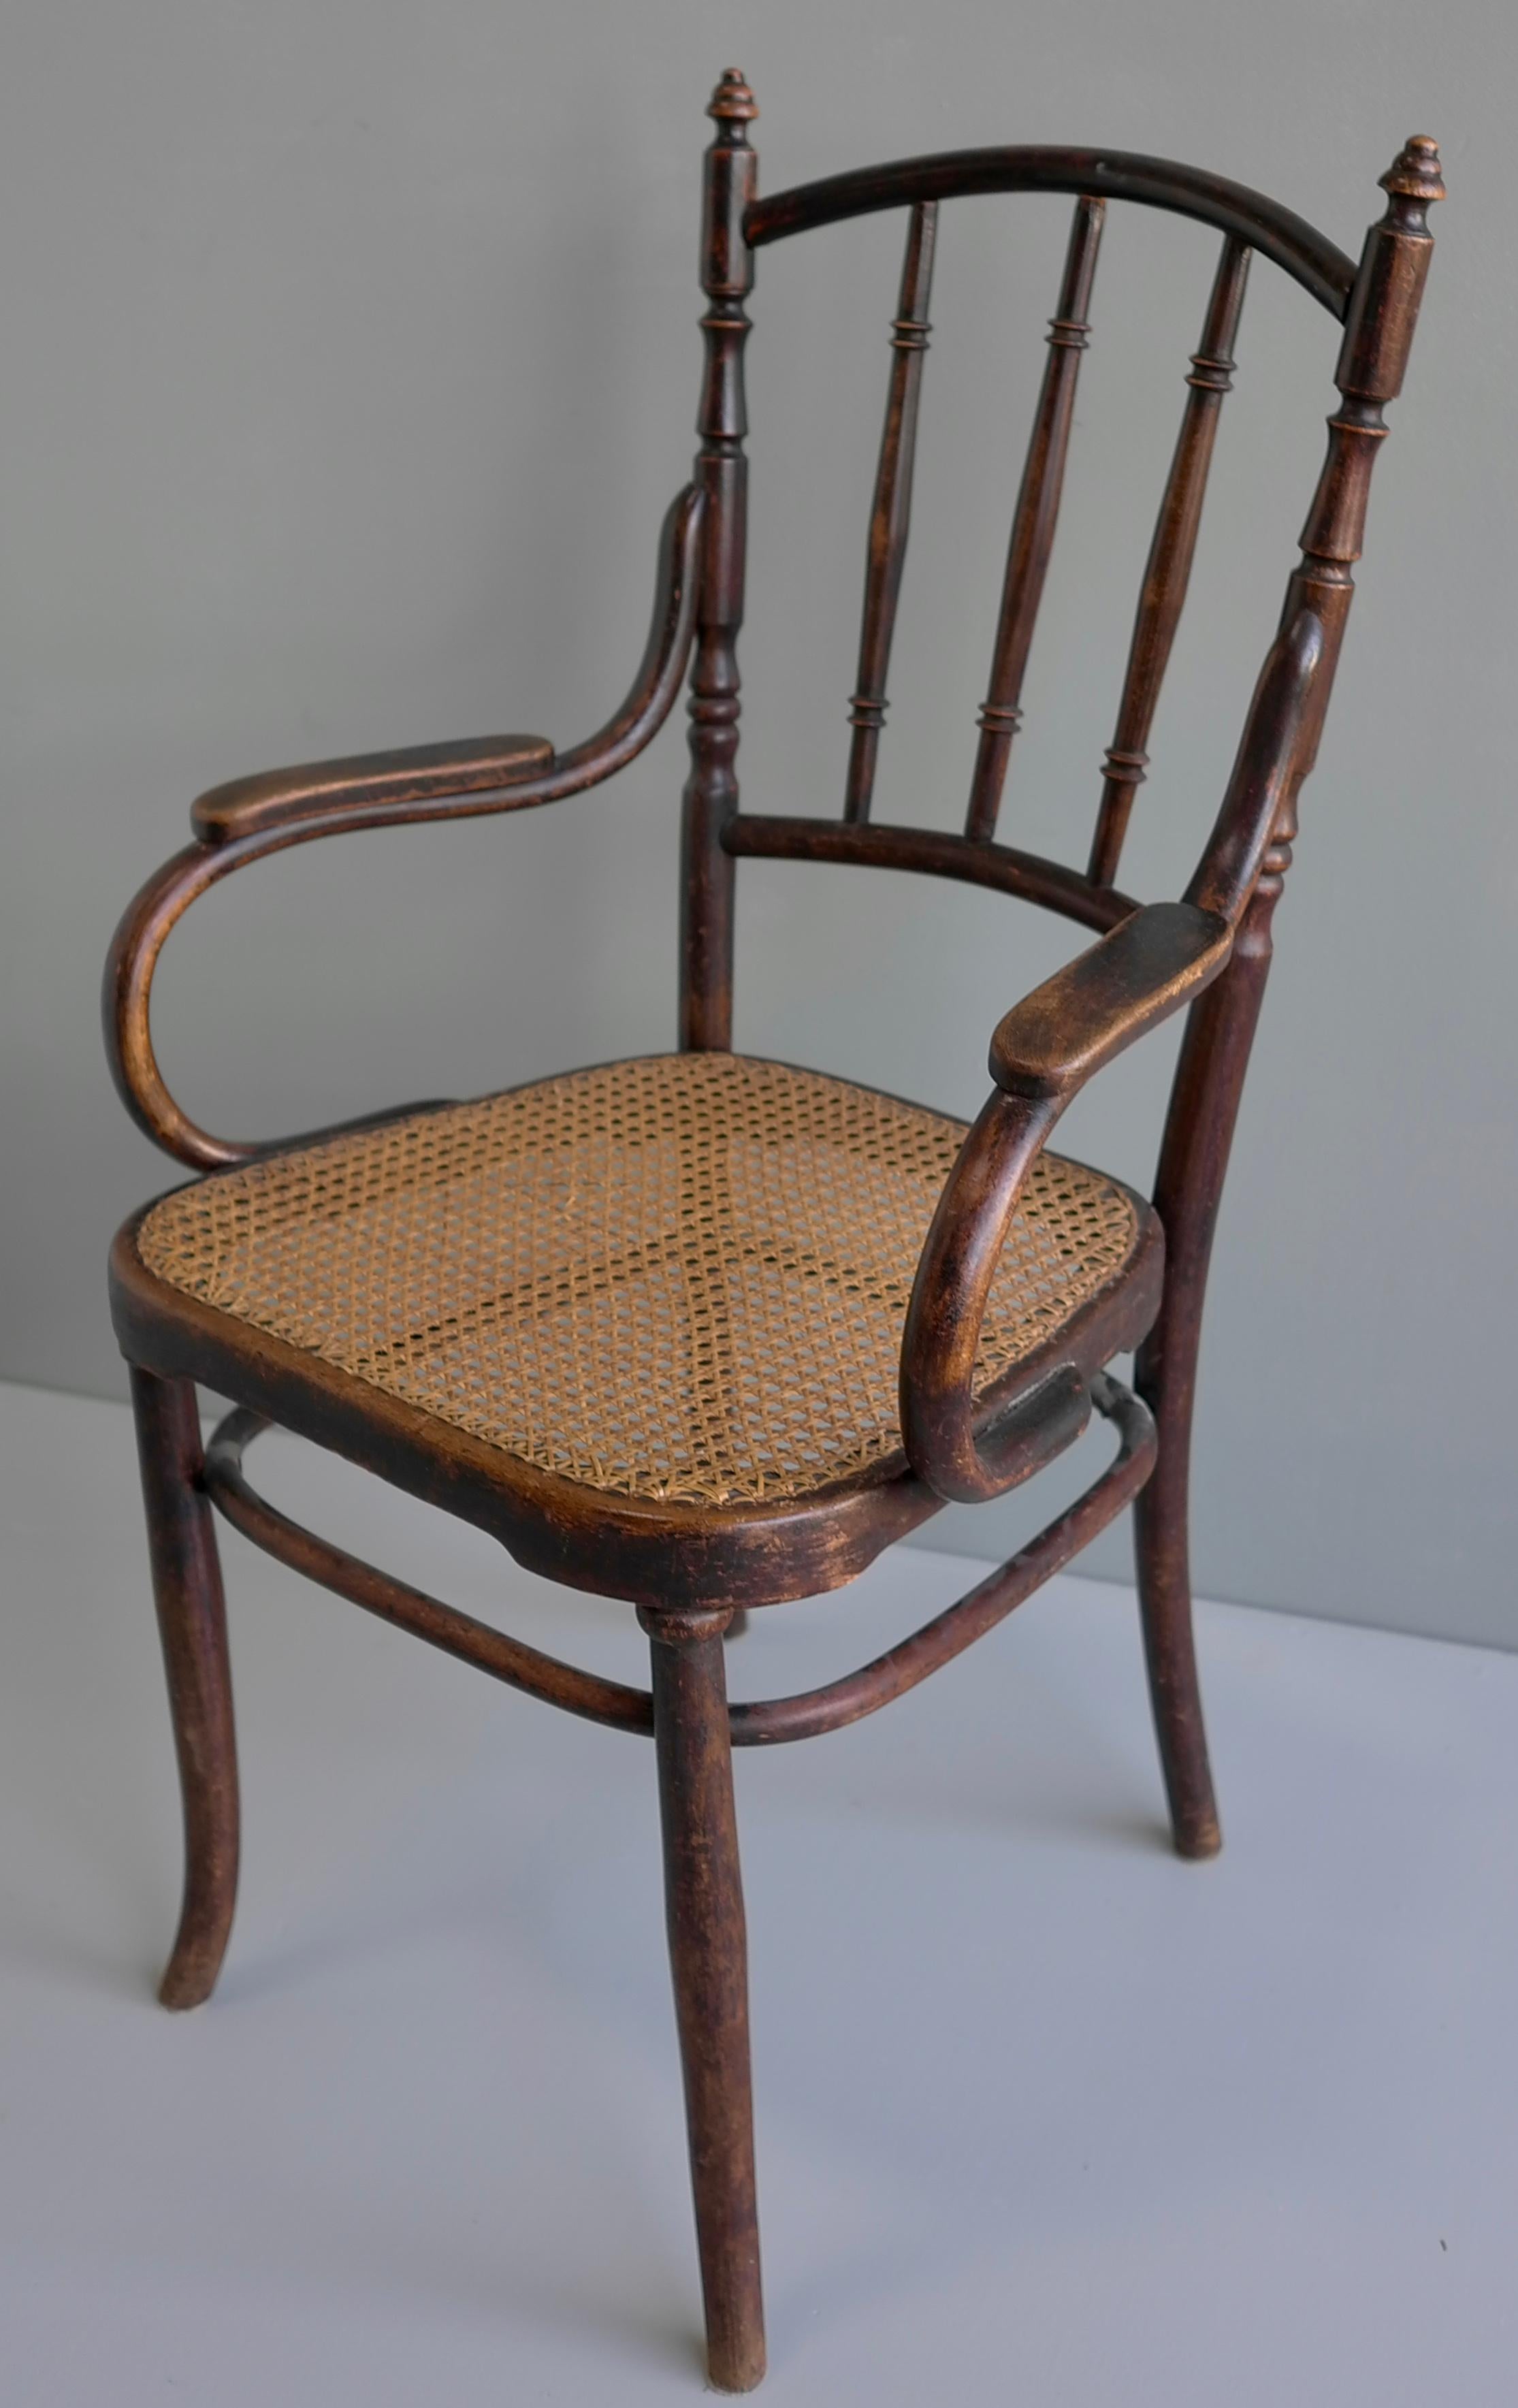 Rare Josef Hoffman Chair for Mundus Vienna Austria 1907-1914




Leopold Pilzer, a junior partner at the bentwood furniture company Rudolf Weill & Co., merged sixteen smaller bentwood furniture manufacturers to create the limited company Mundus in